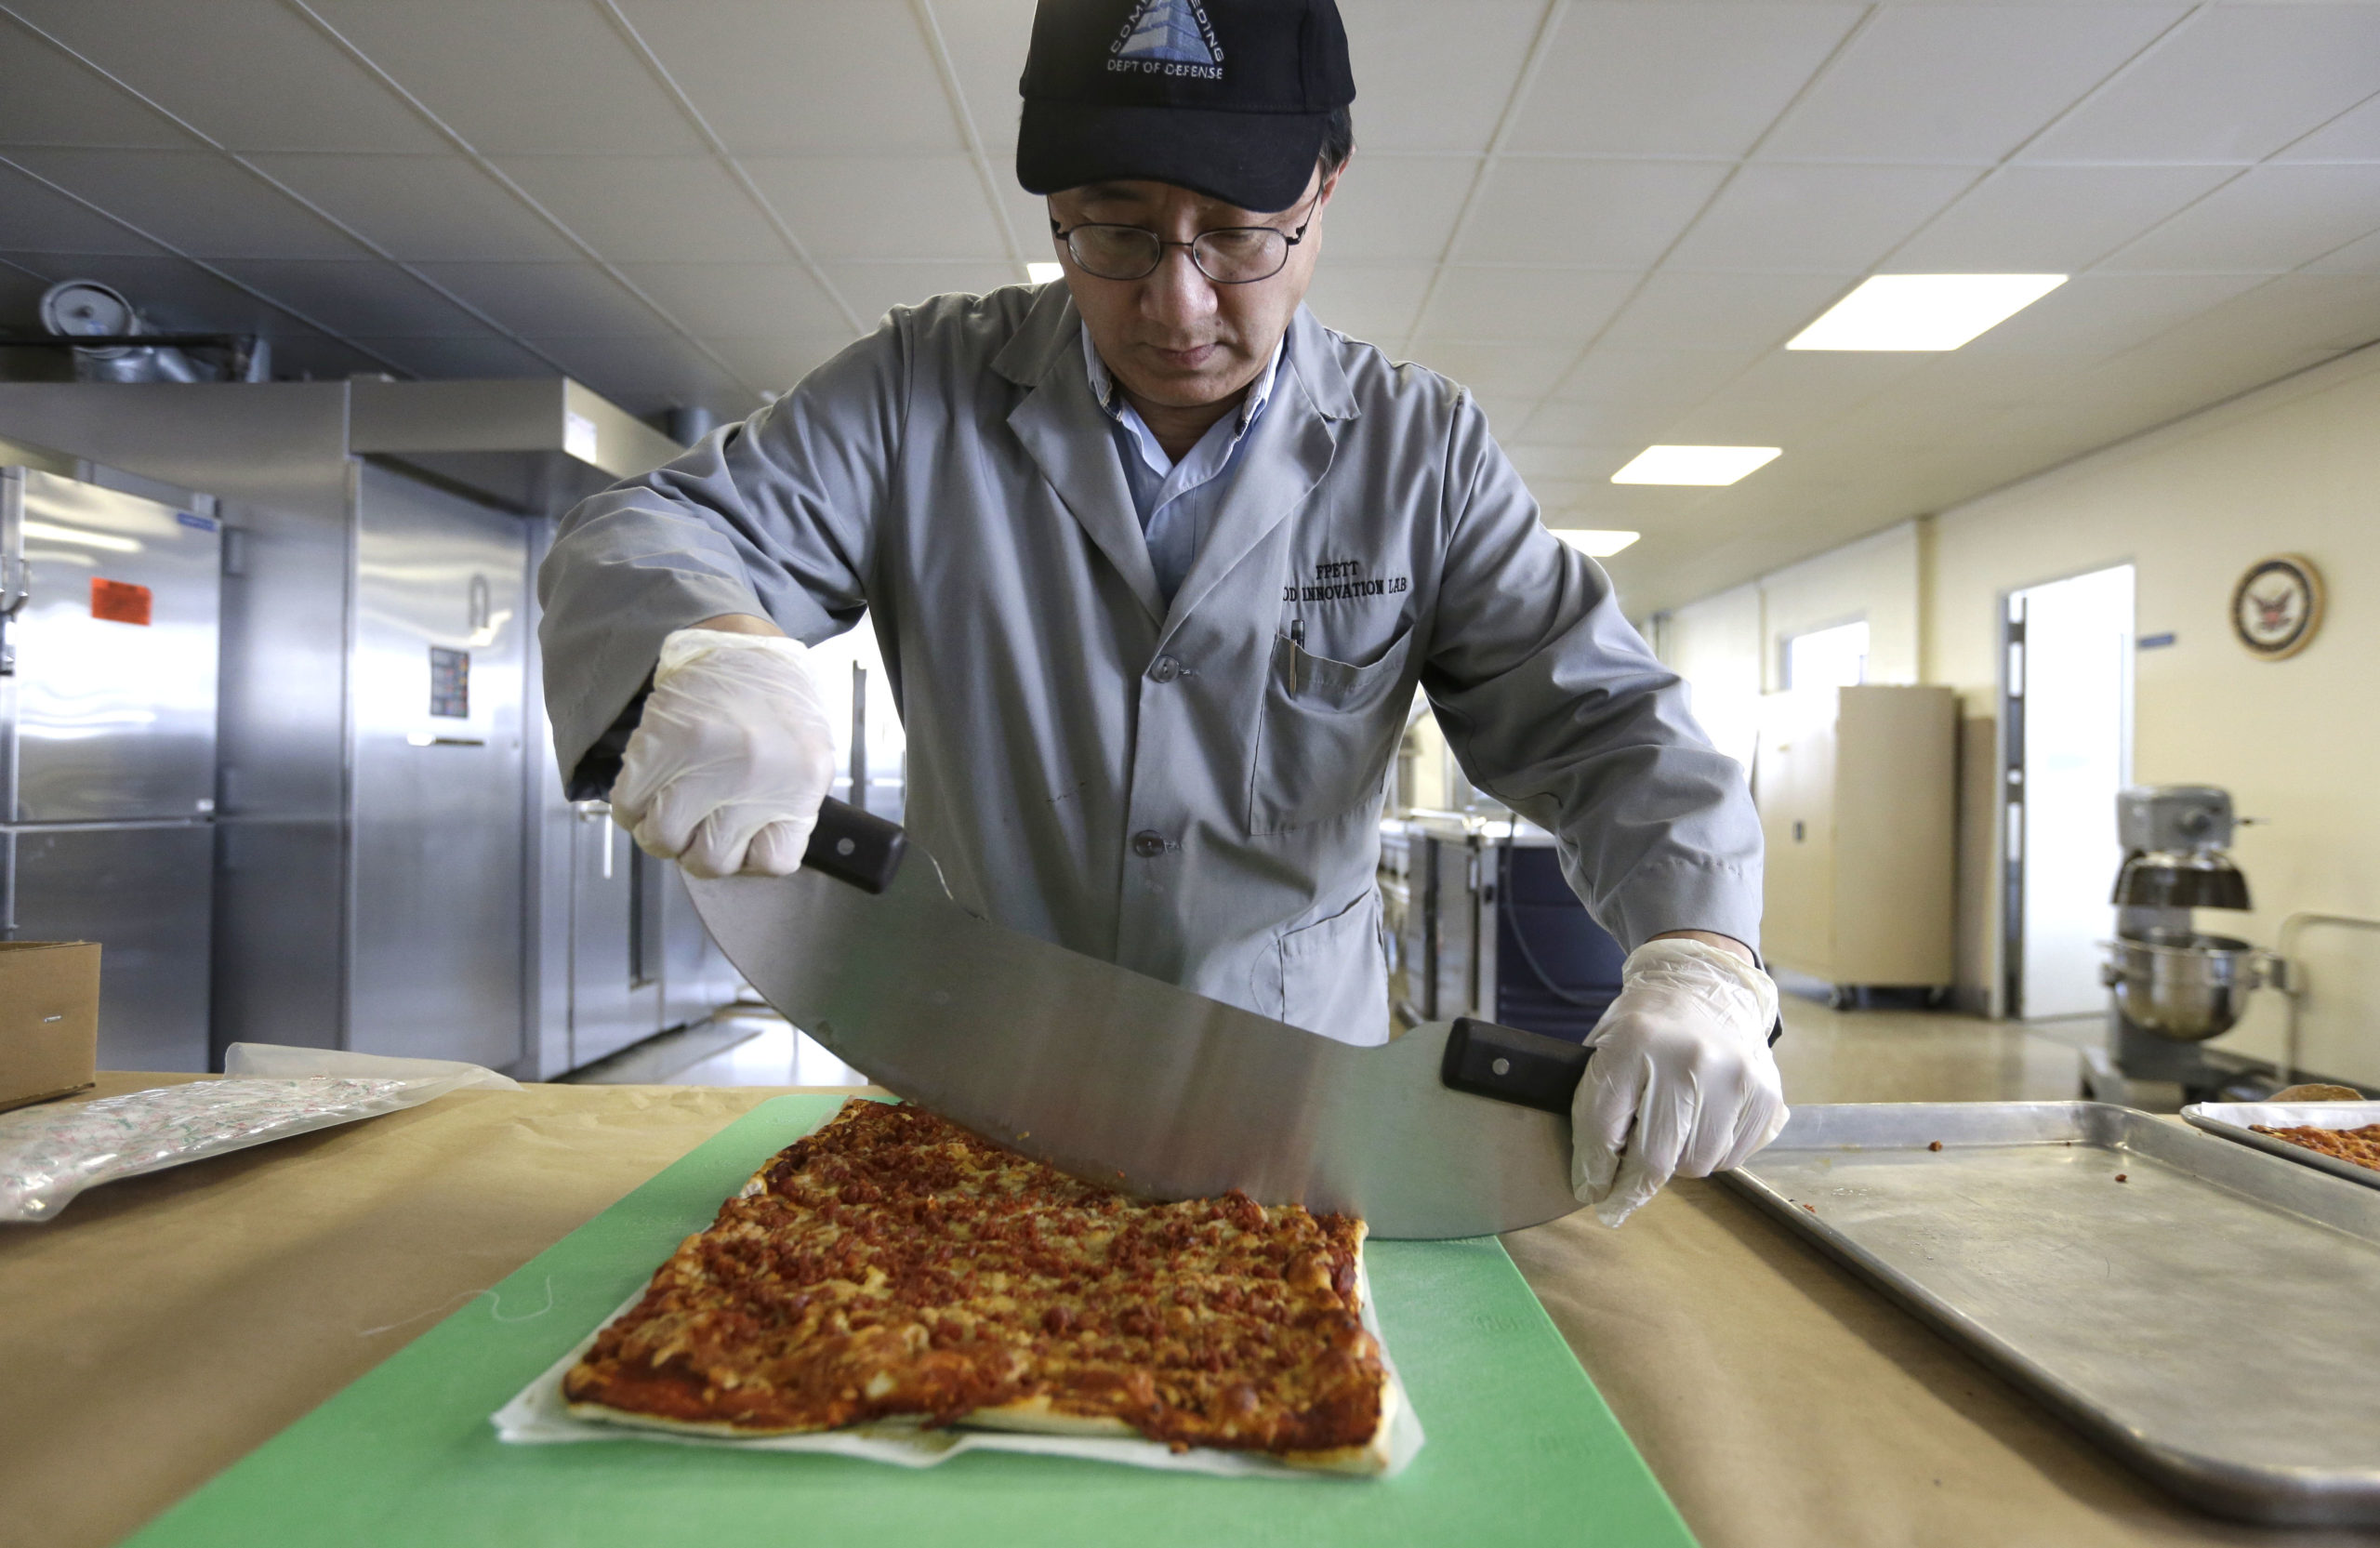 US Army Is Perfecting A Pizza That Lasts For Years And Years